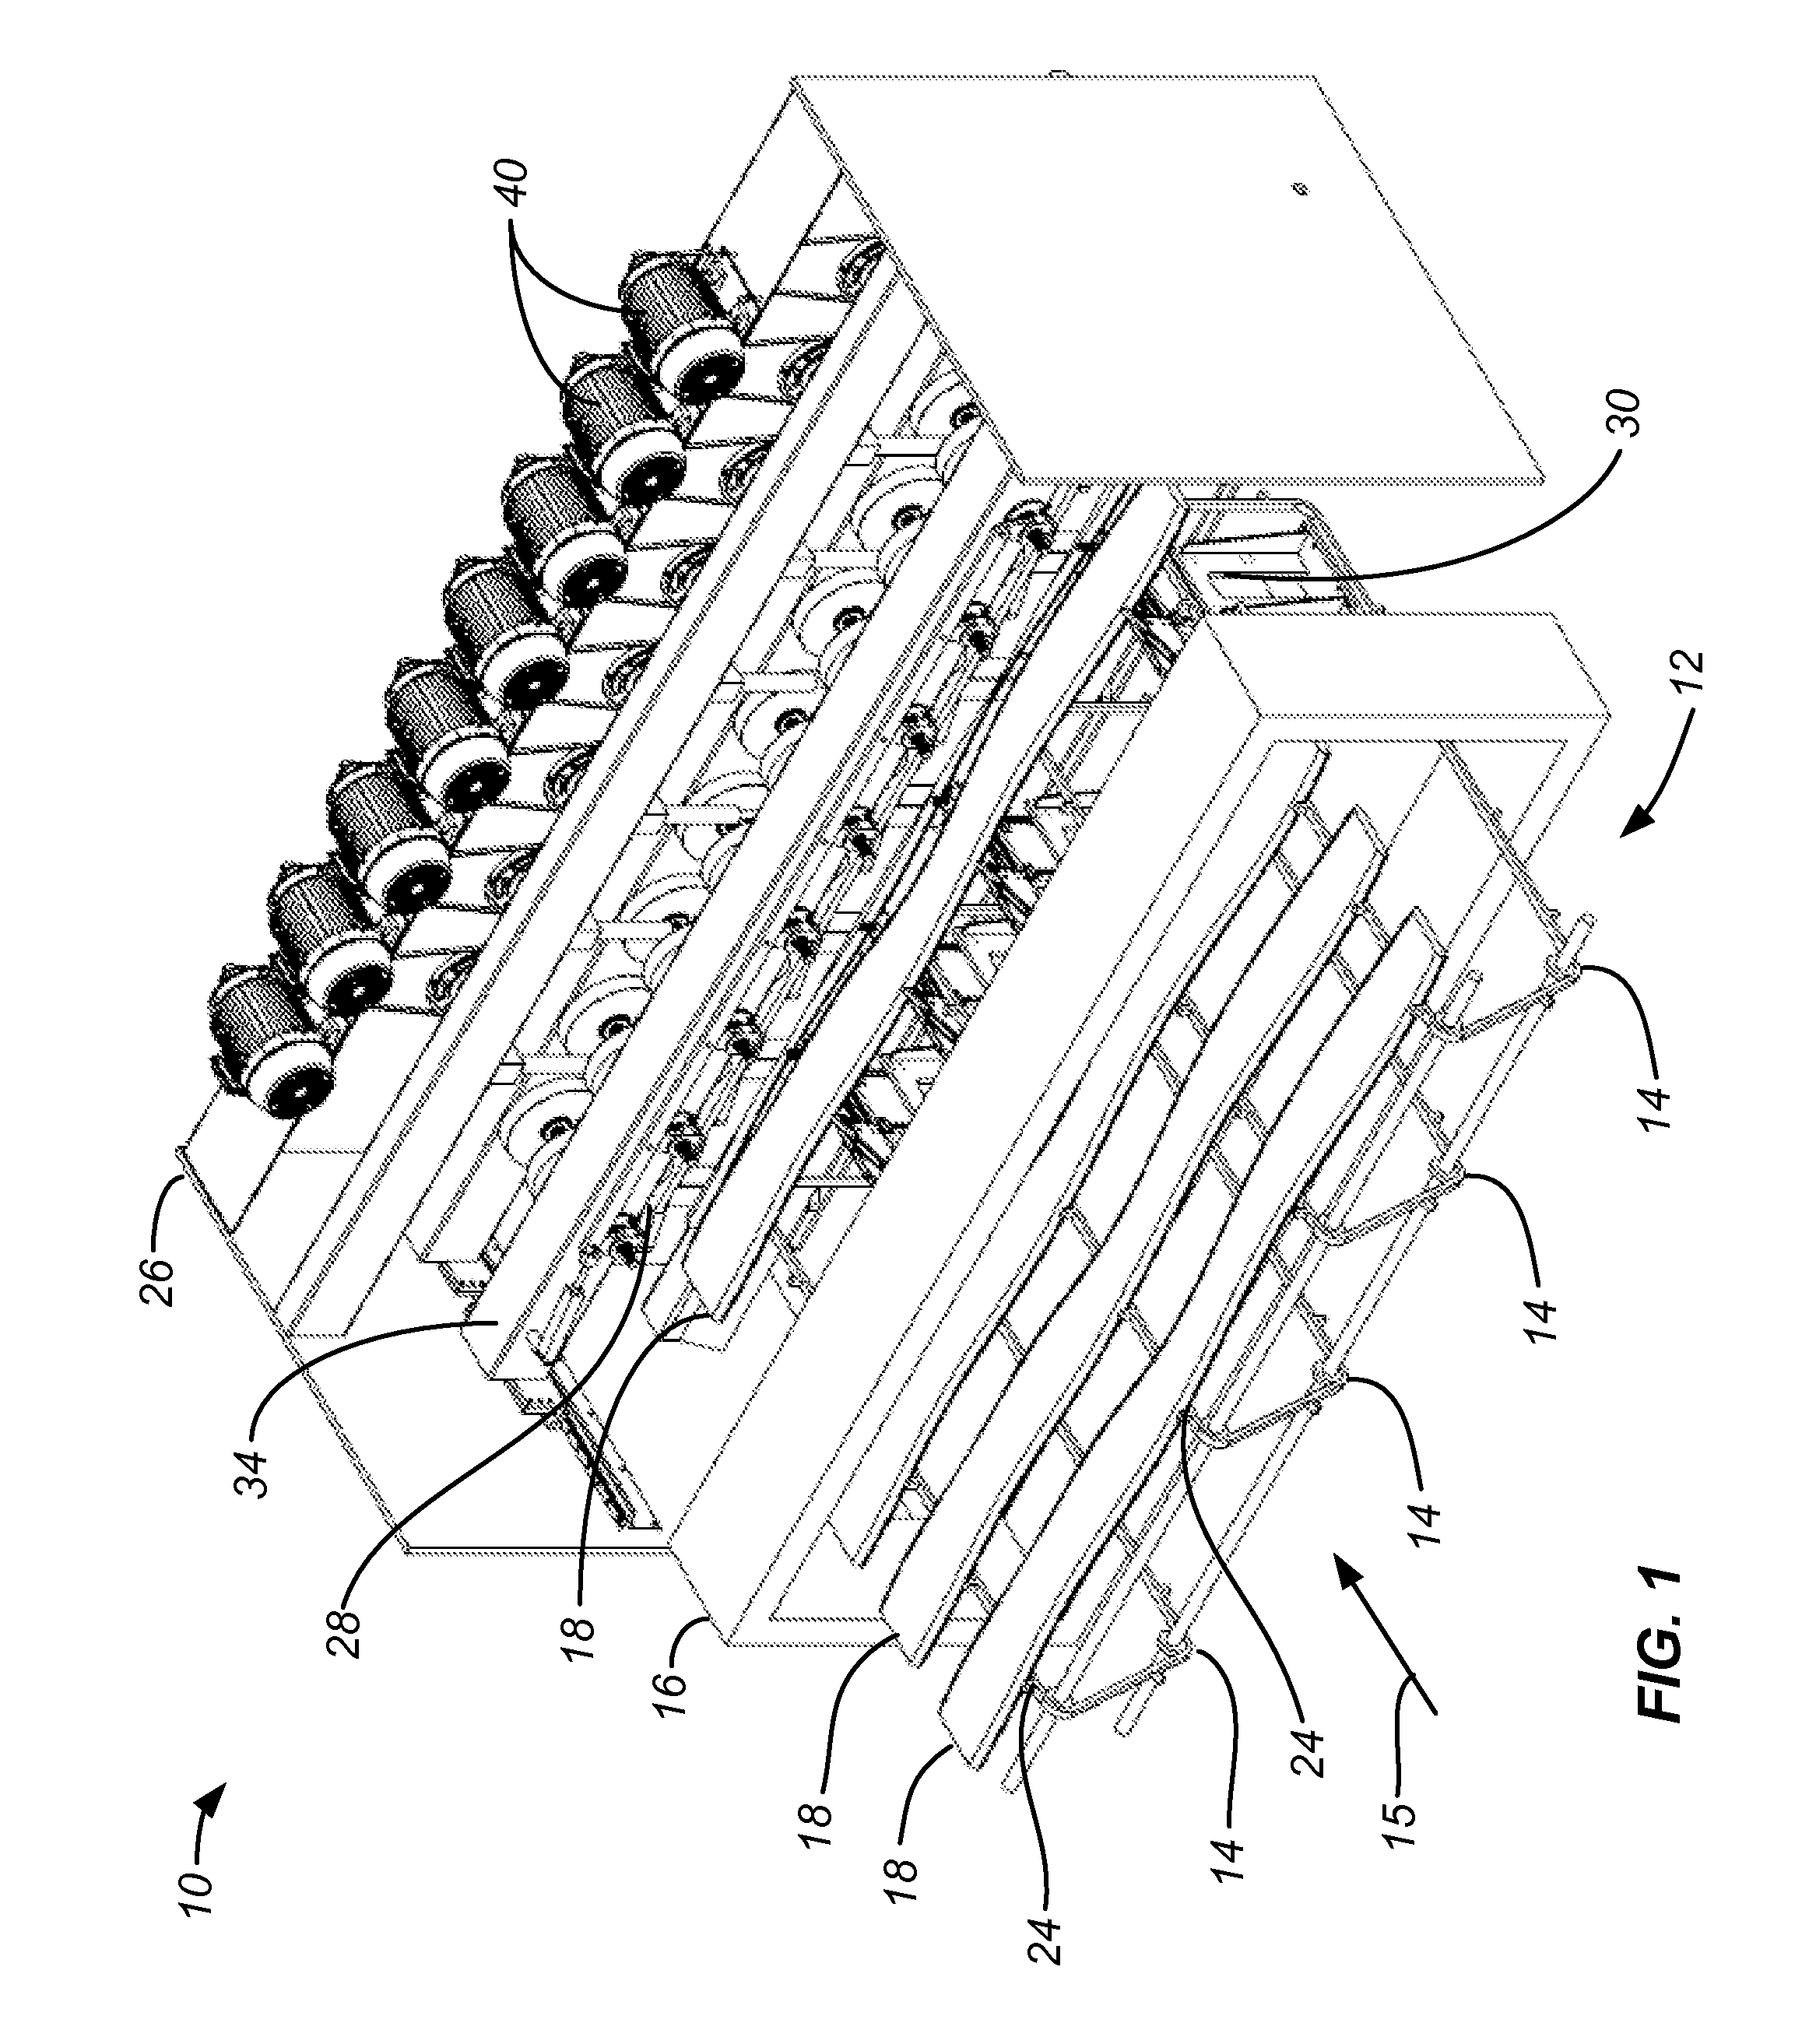 Automatic Workpiece Edging and Ripping Device and Method